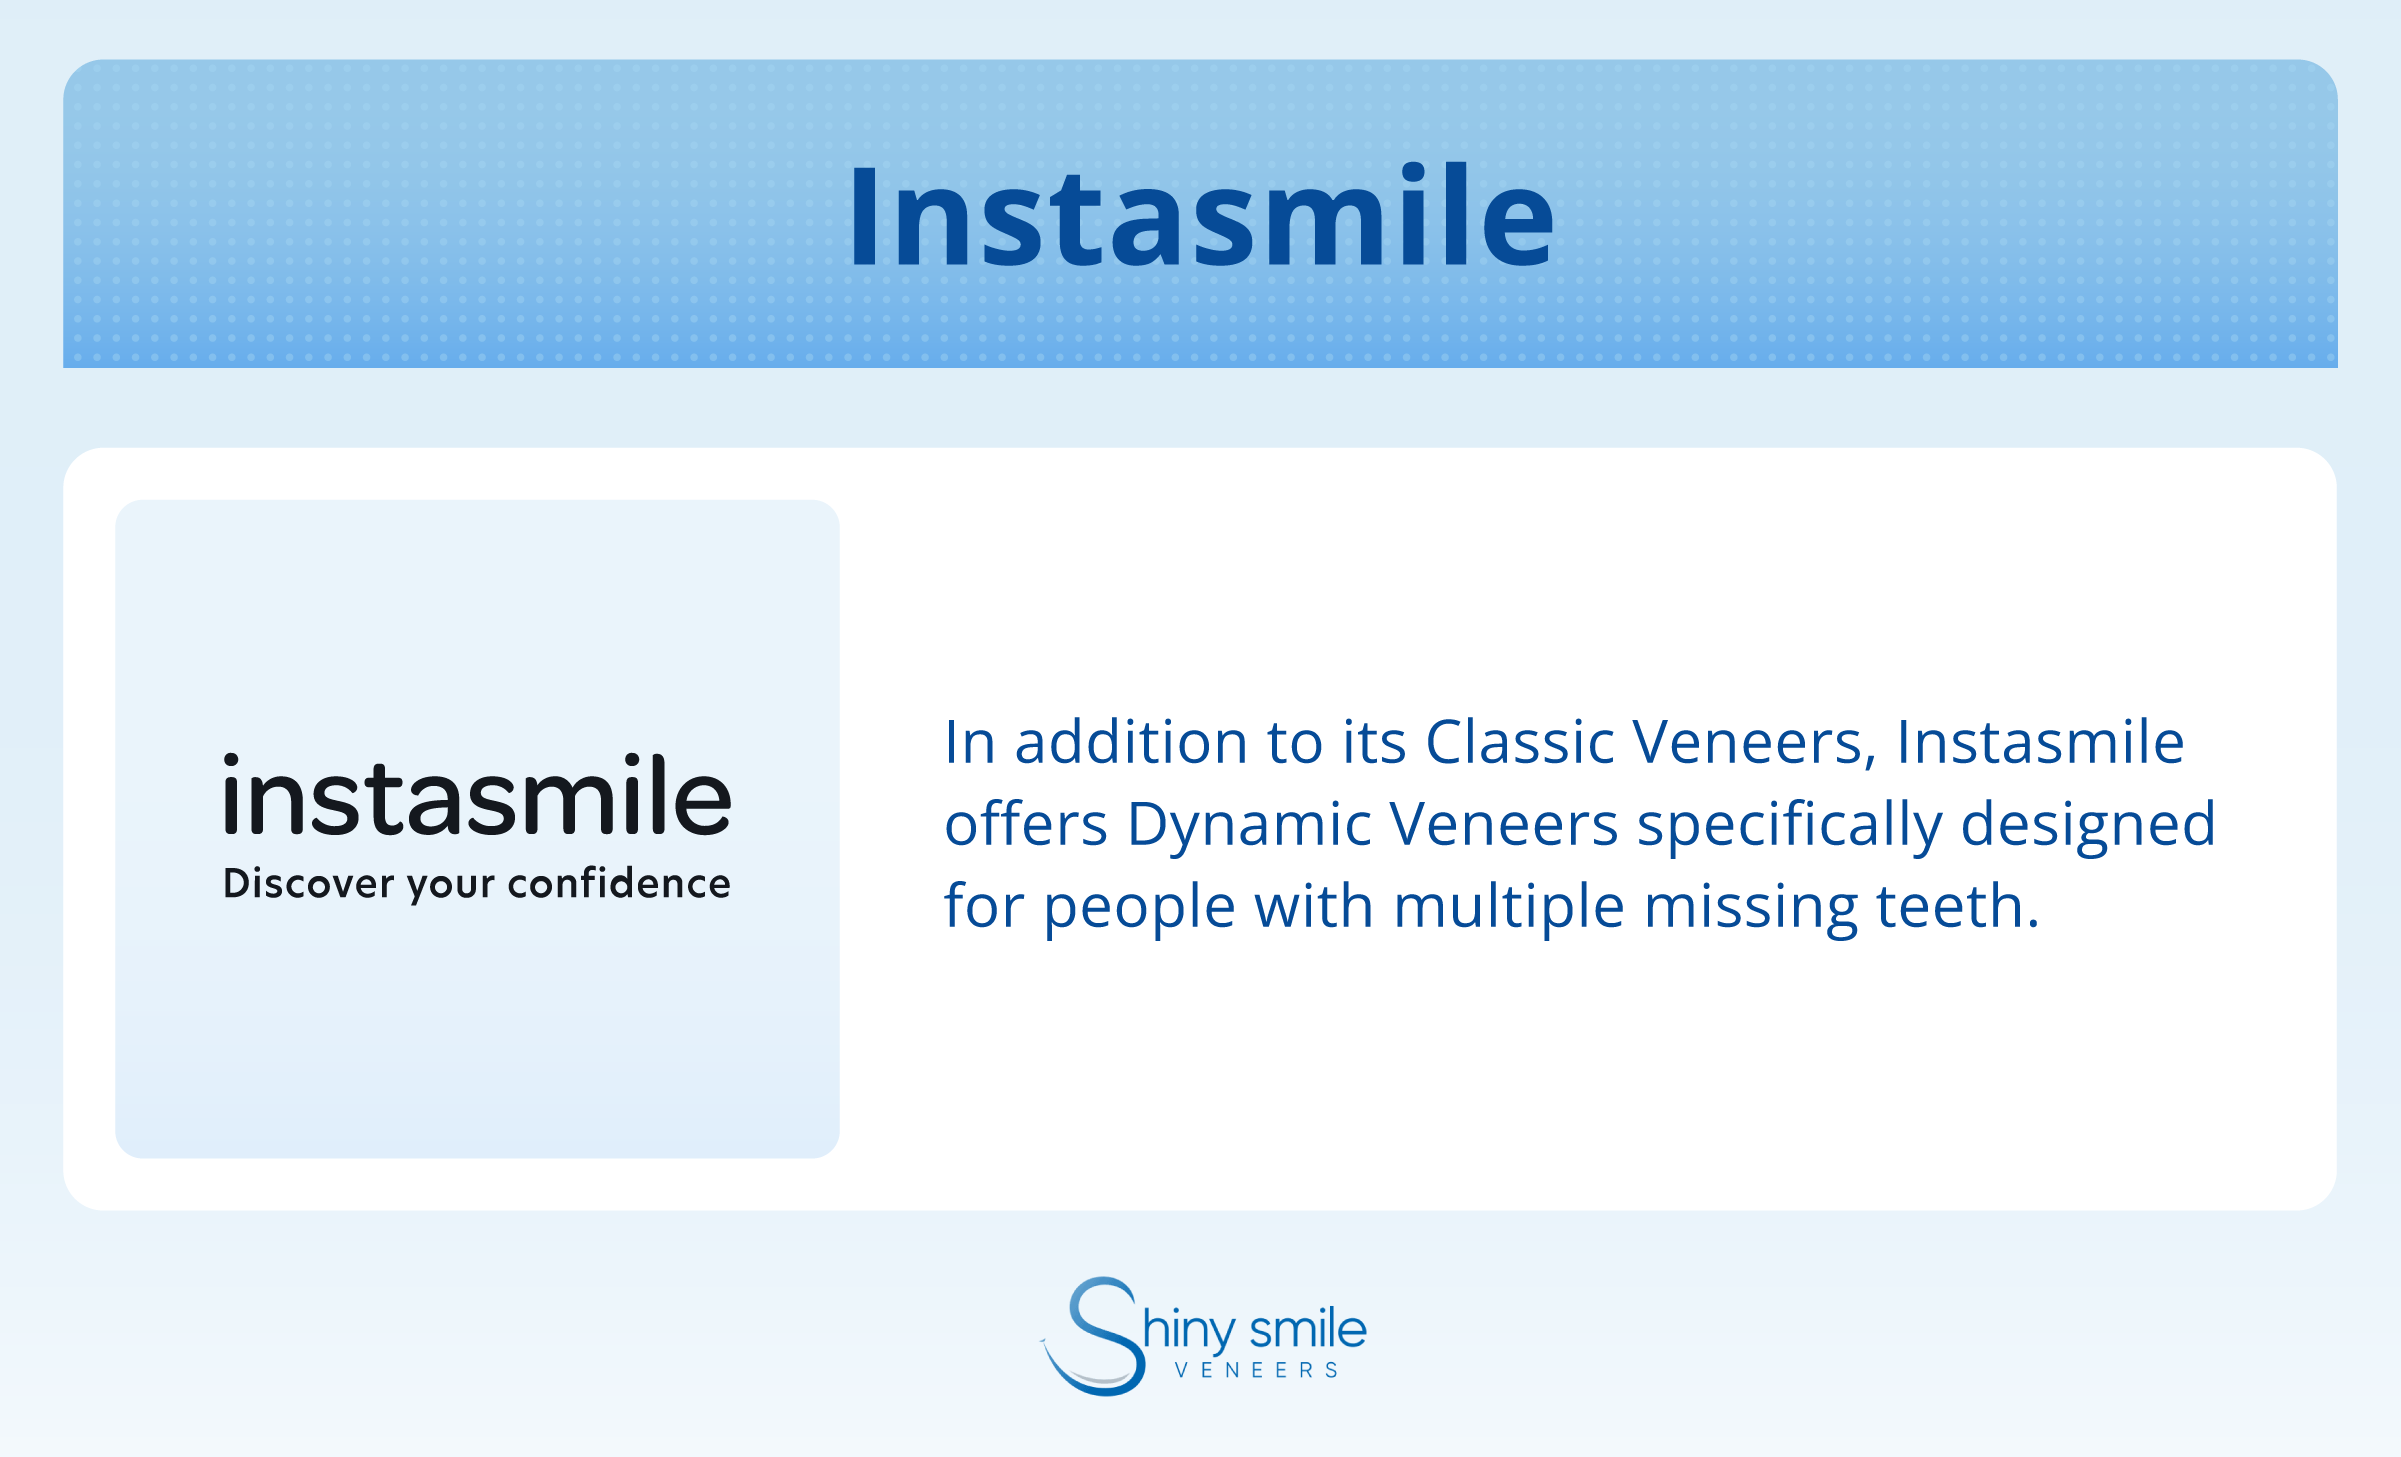 about Instasmile 